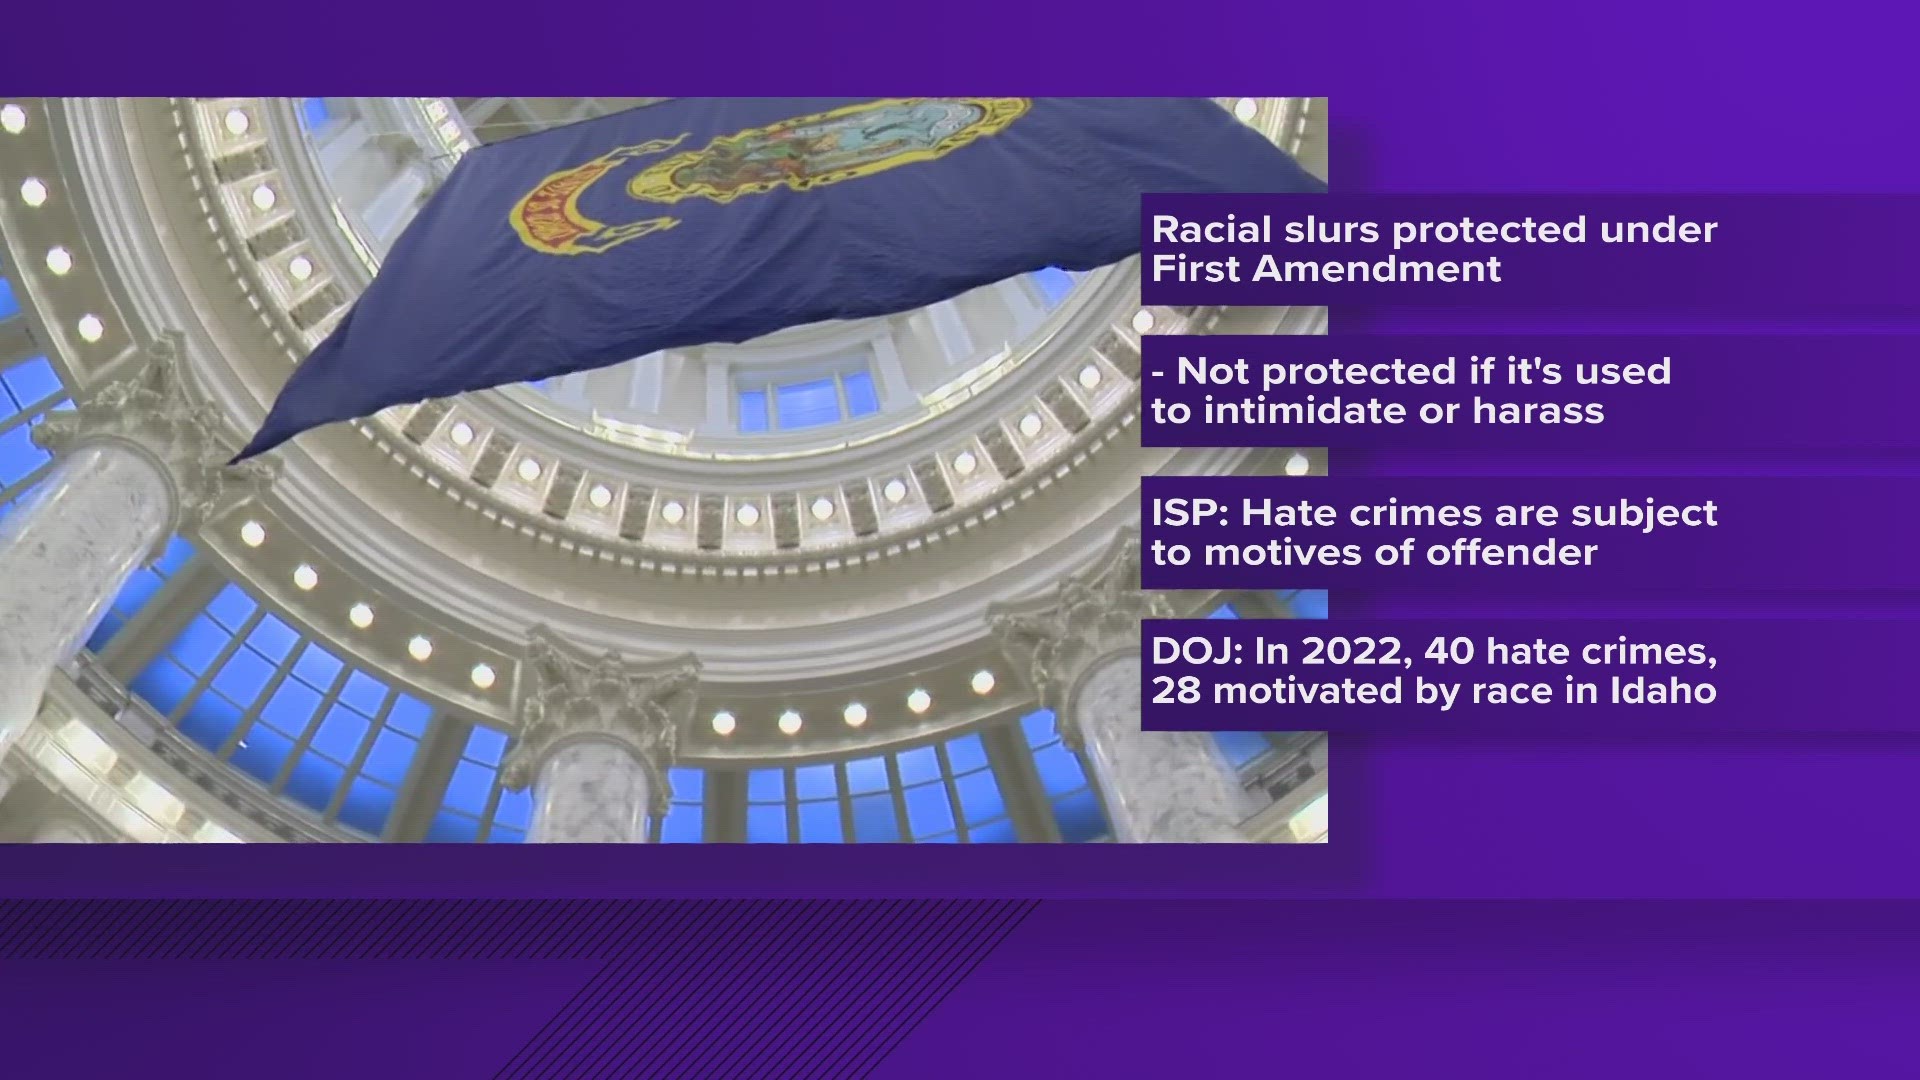 Coeur d'Alene city officials say they're investigating this as a potential hate crime and even getting the FBI involved. But what constitutes a hate crime in Idaho?